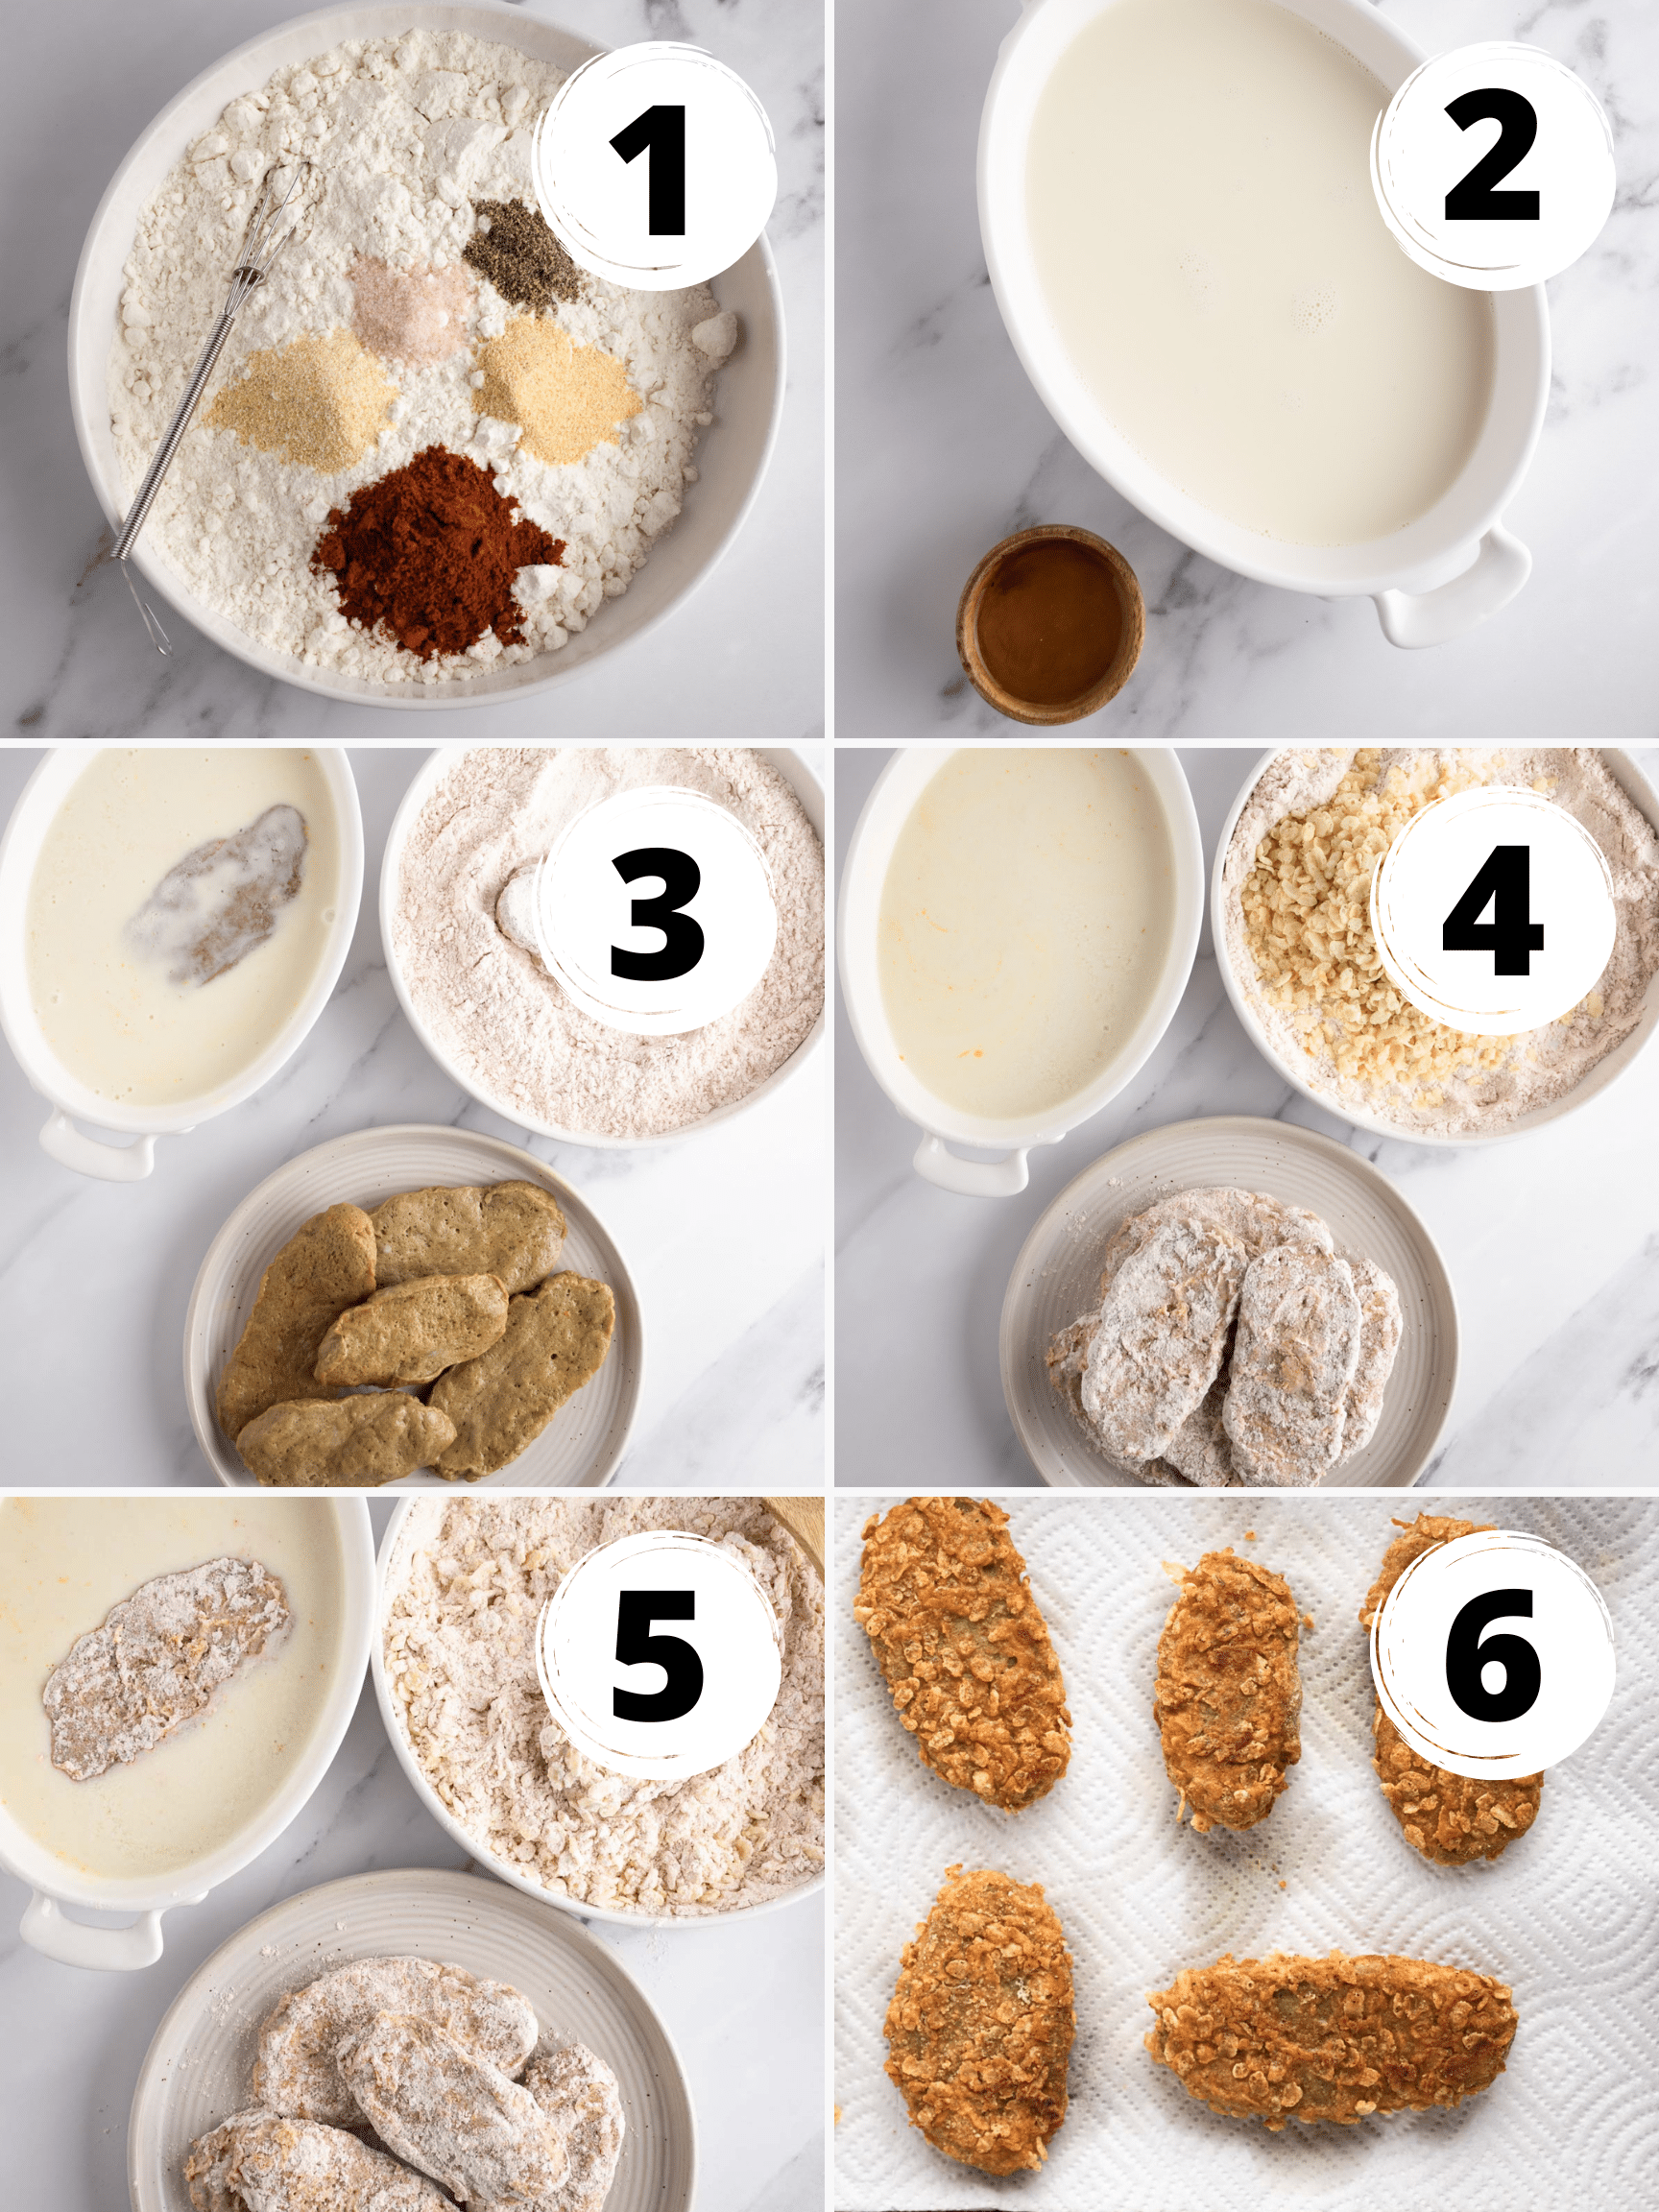 Collage of photos showing the steps to make vegan fried chicken.